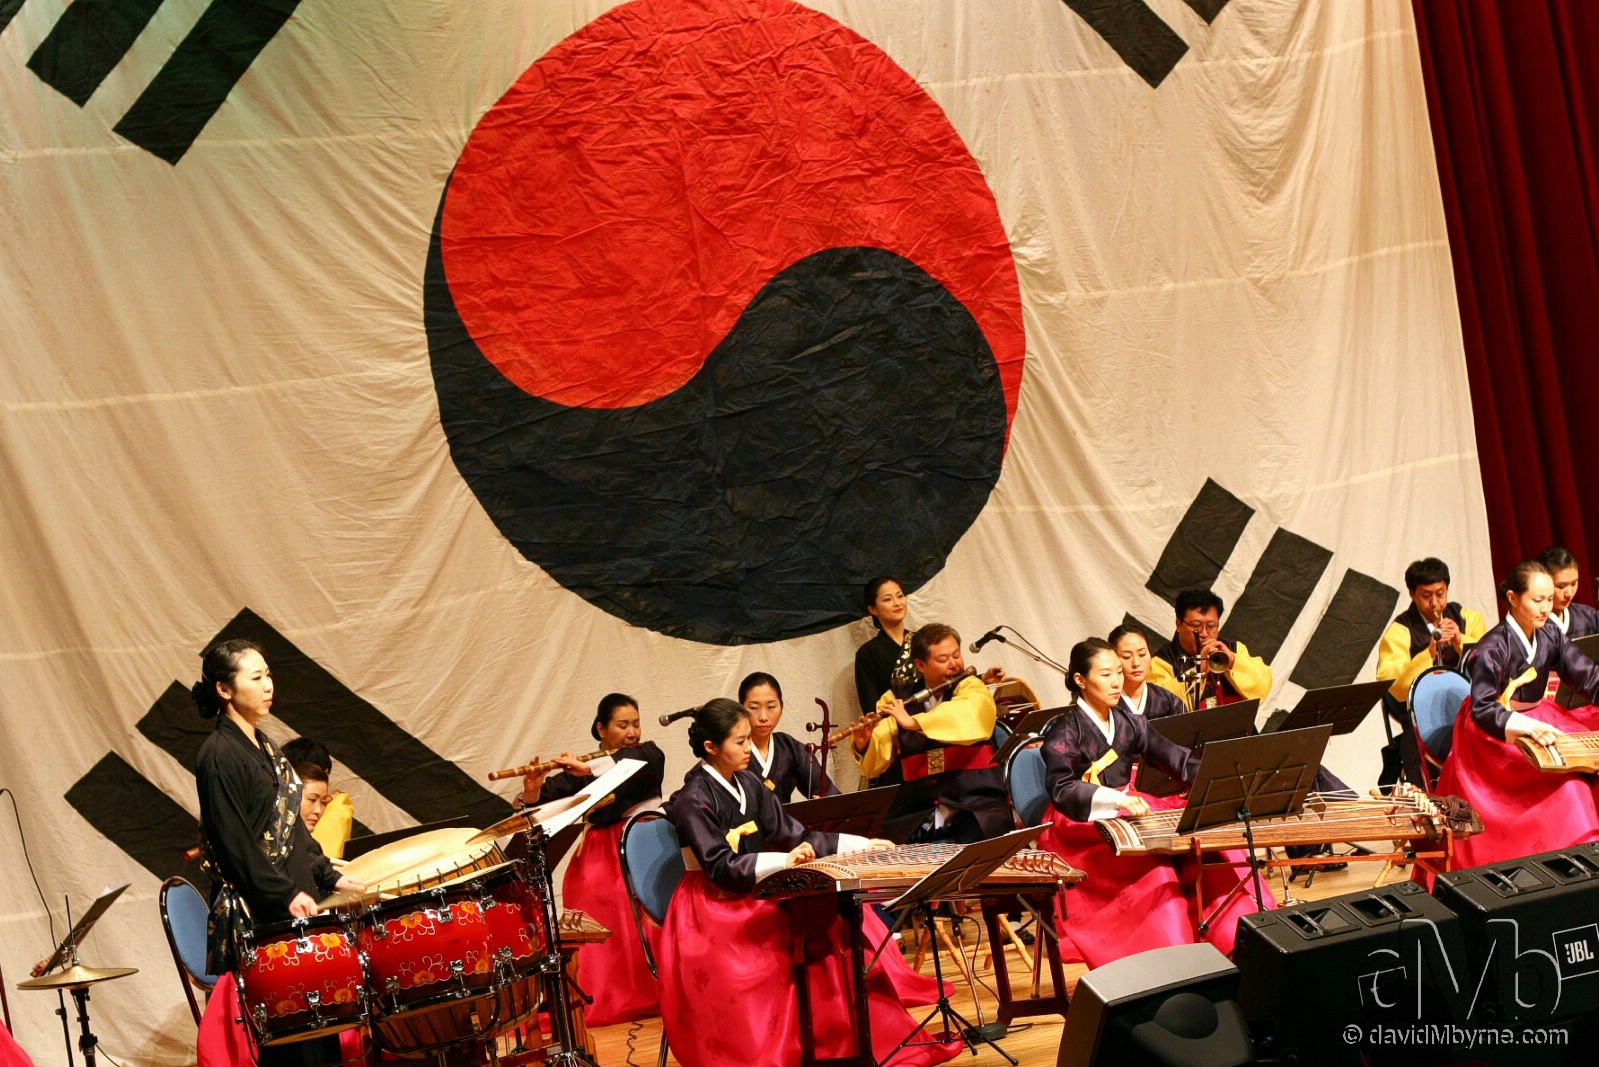 A traditional music performance at the National Youth Center of Korea in Cheonan, South Korea. February 9th, 2010 (50mm, 1/50sec, f/4.0, iso640) 